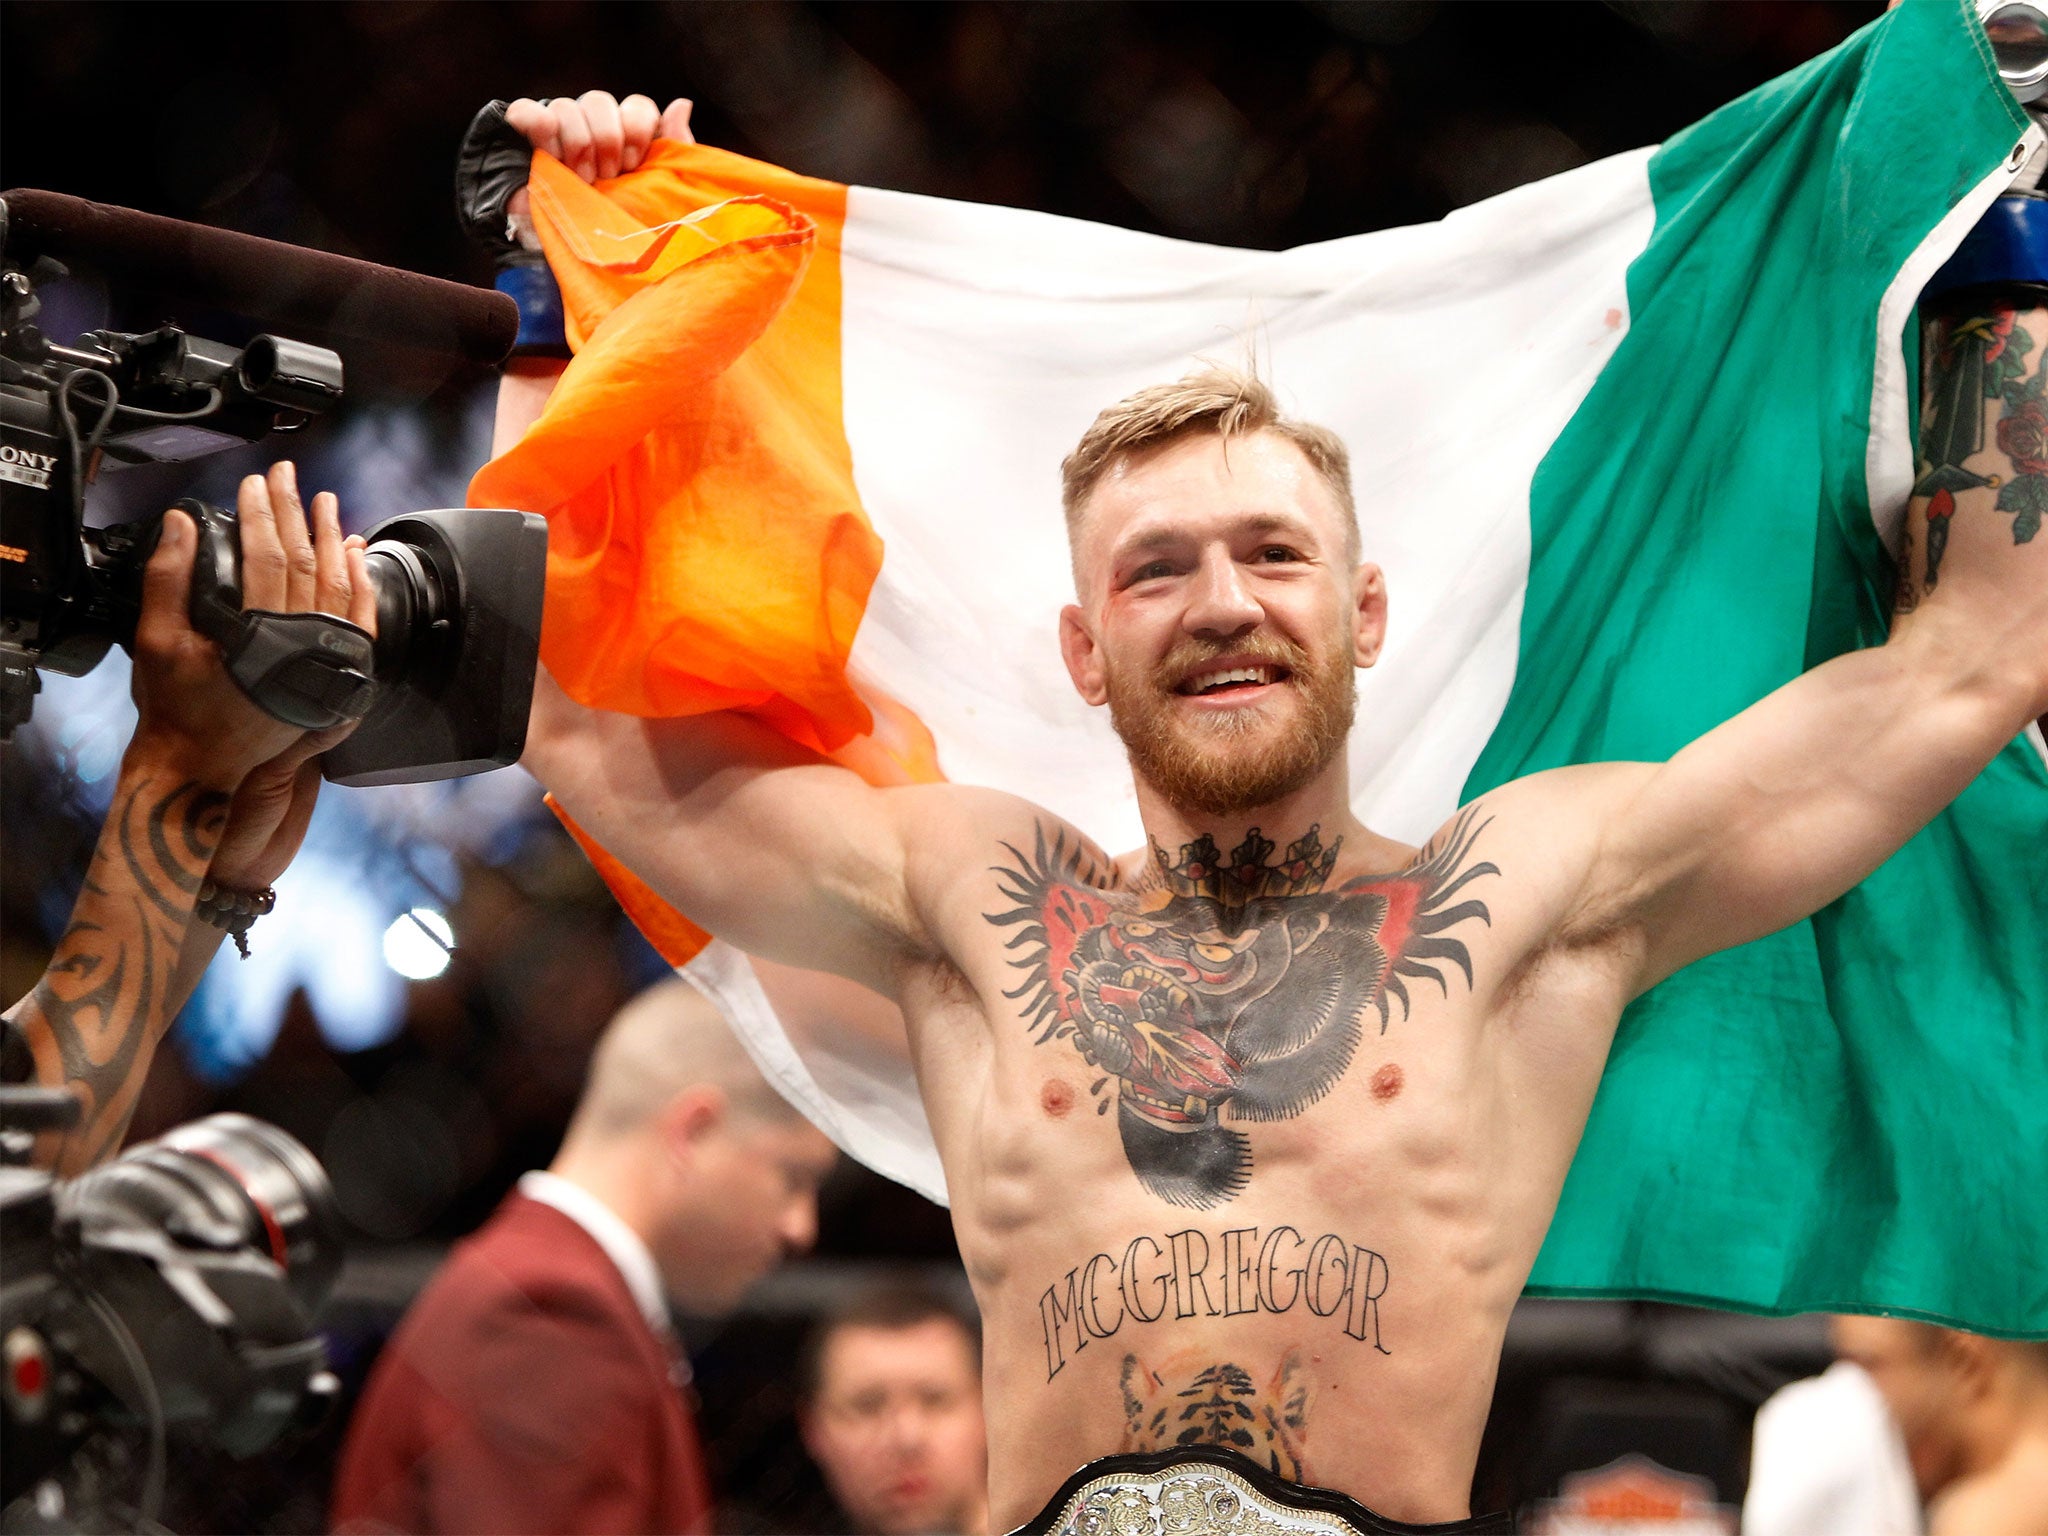 Conor McGregor: “They don’t understand these crazy Irish men"